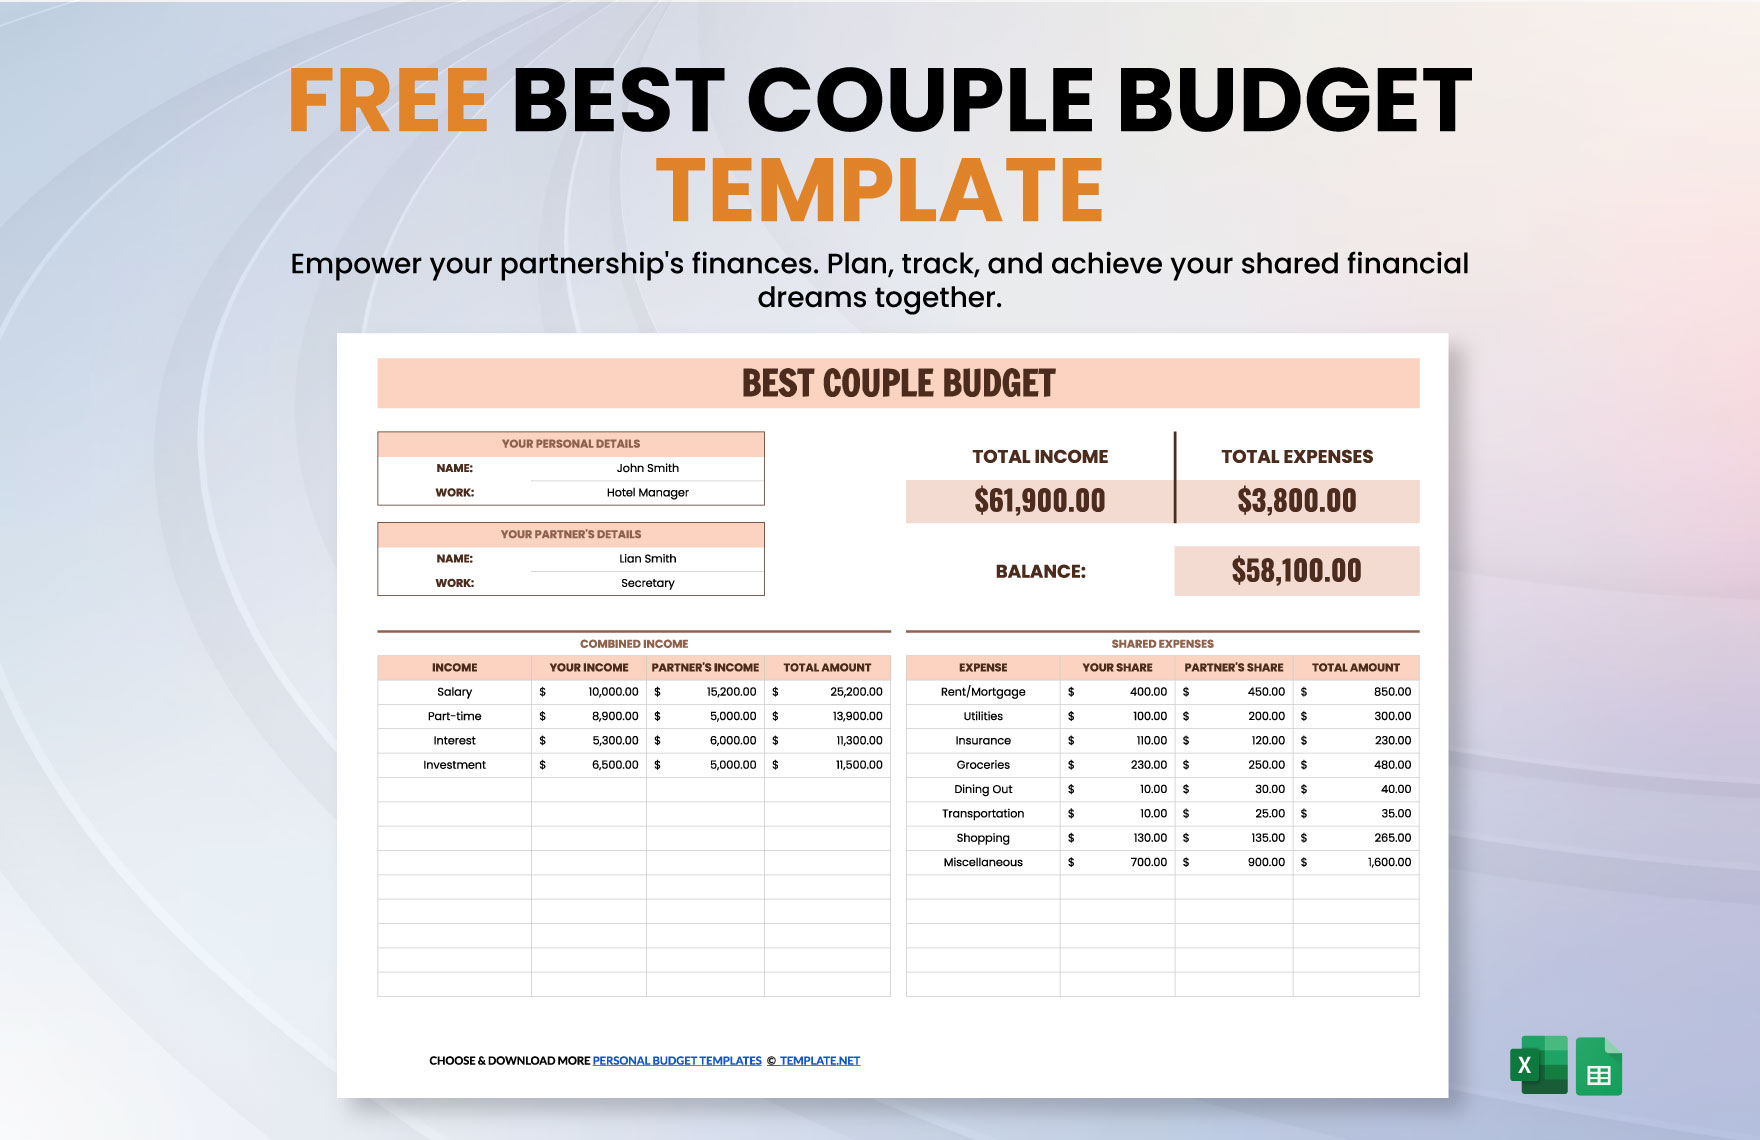 Best Couple Budget Template